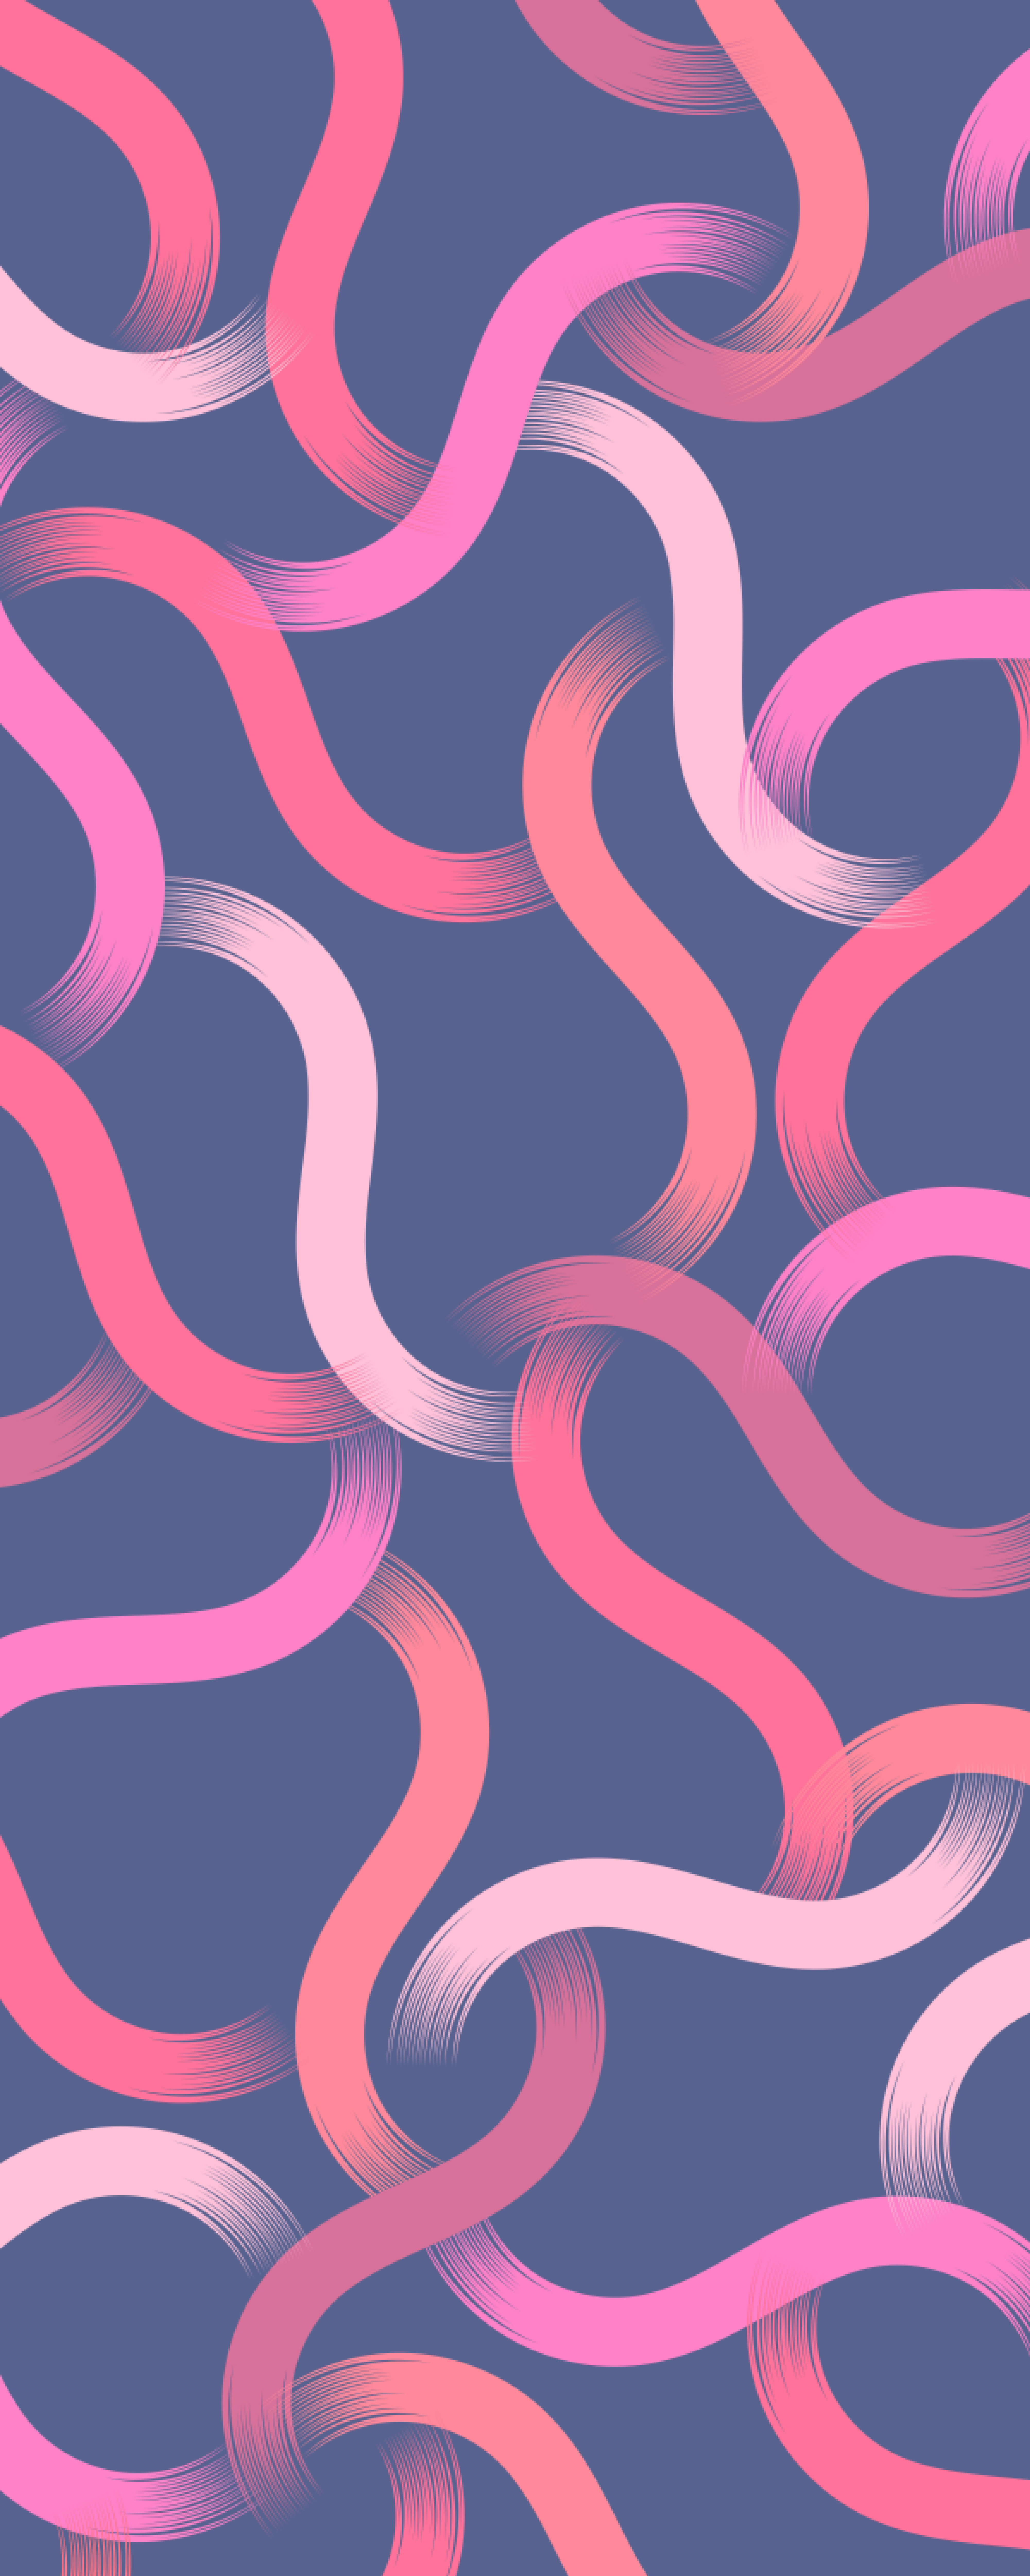 shades, texture, pink, lines, textures, winding, sinuous, smears, strokes, intertwining, interweaving